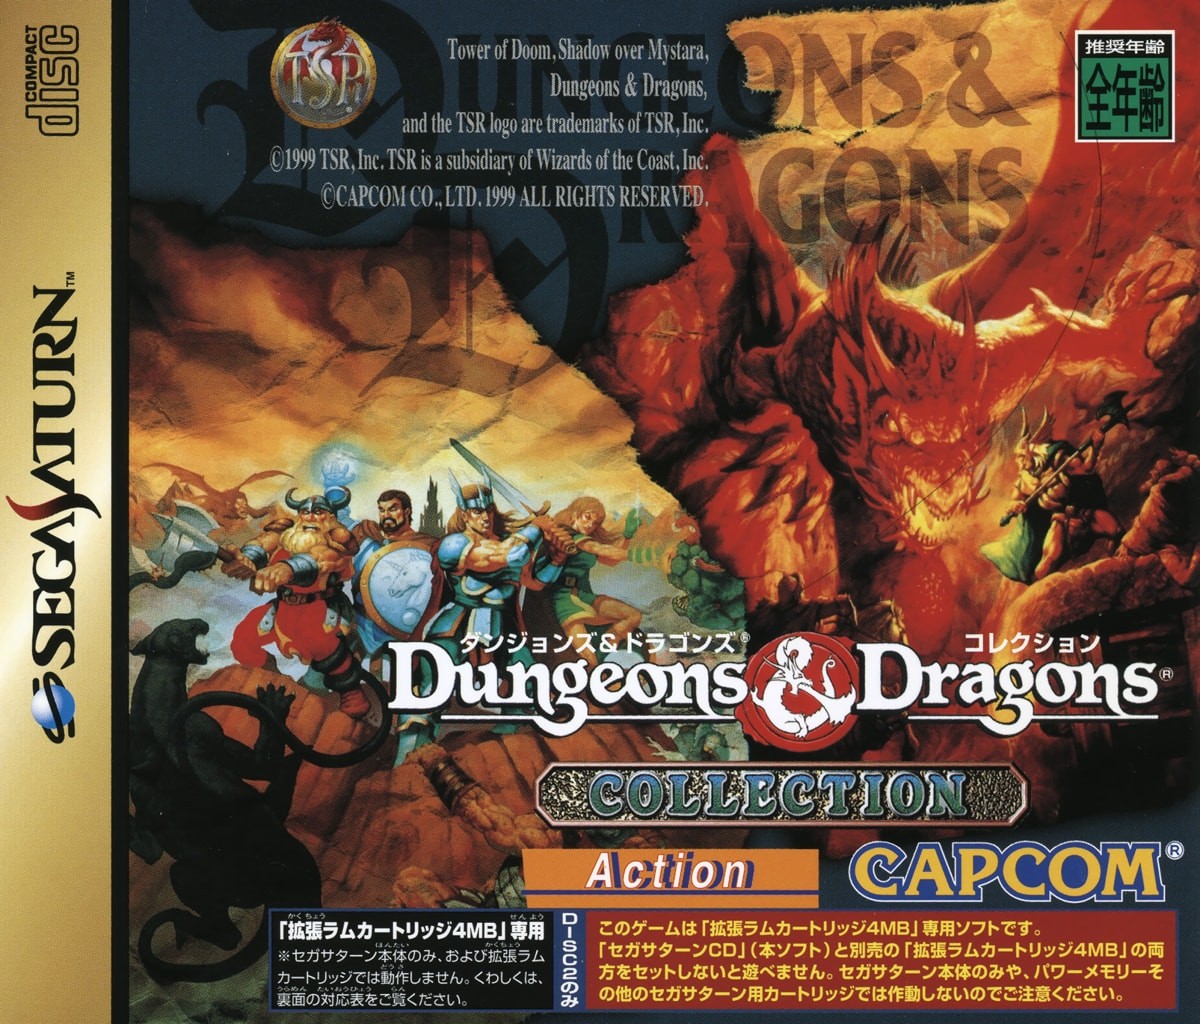 Capa do jogo Dungeons & Dragons Collection